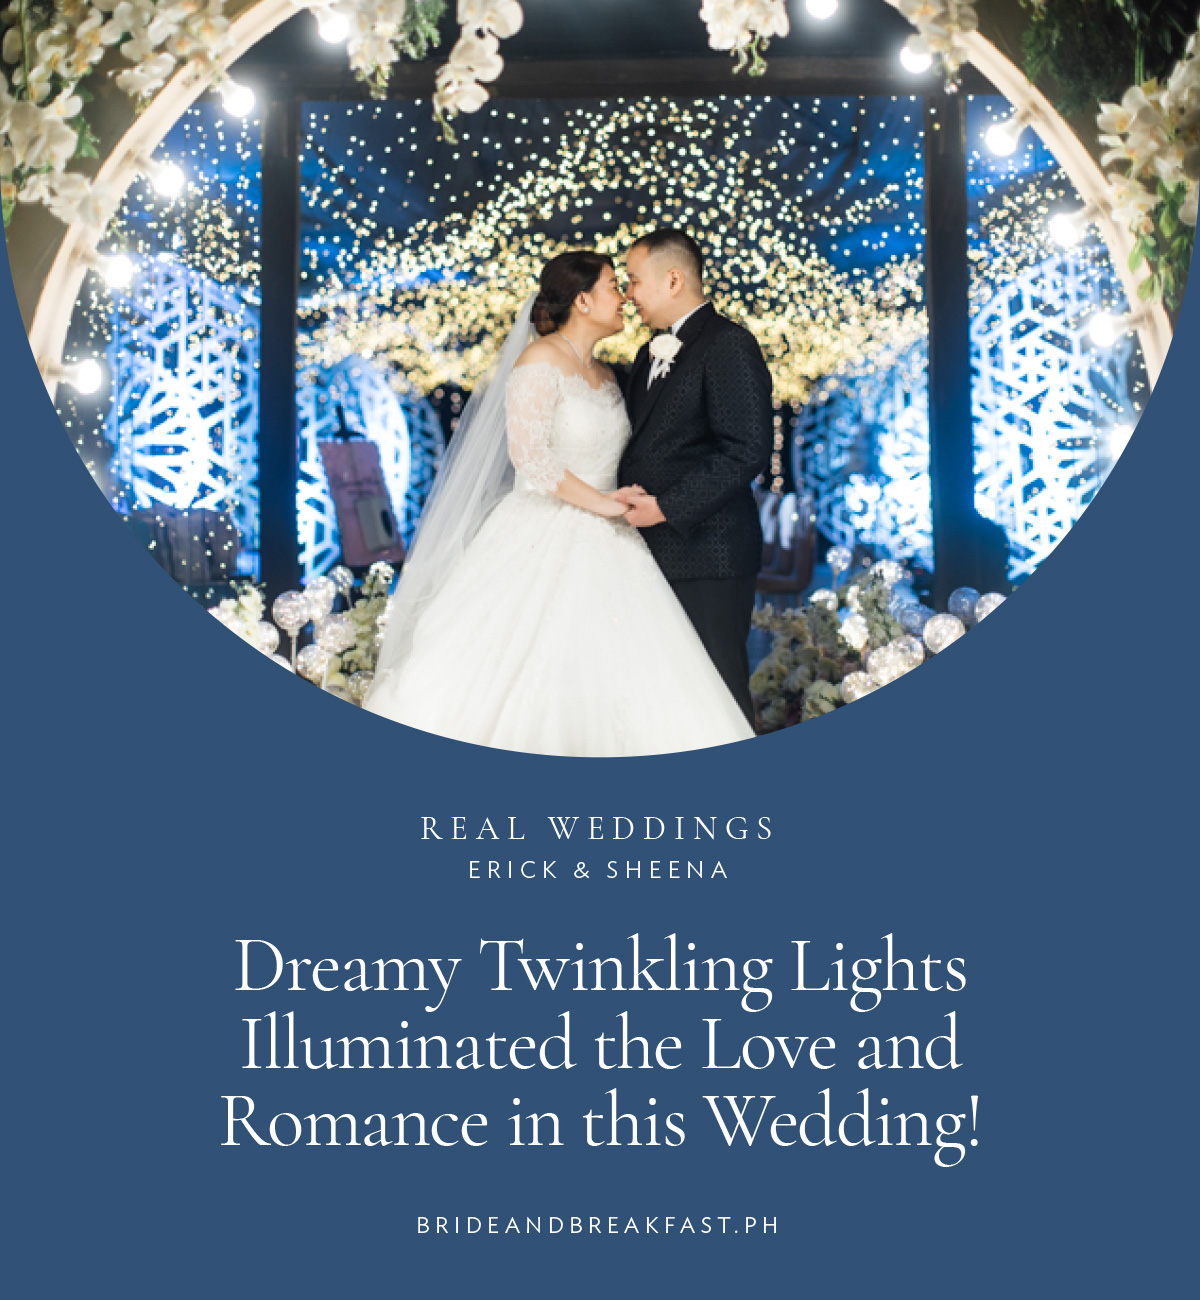 Dreamy Twinkling Lights Illuminated the Love and Romance in this Wedding!